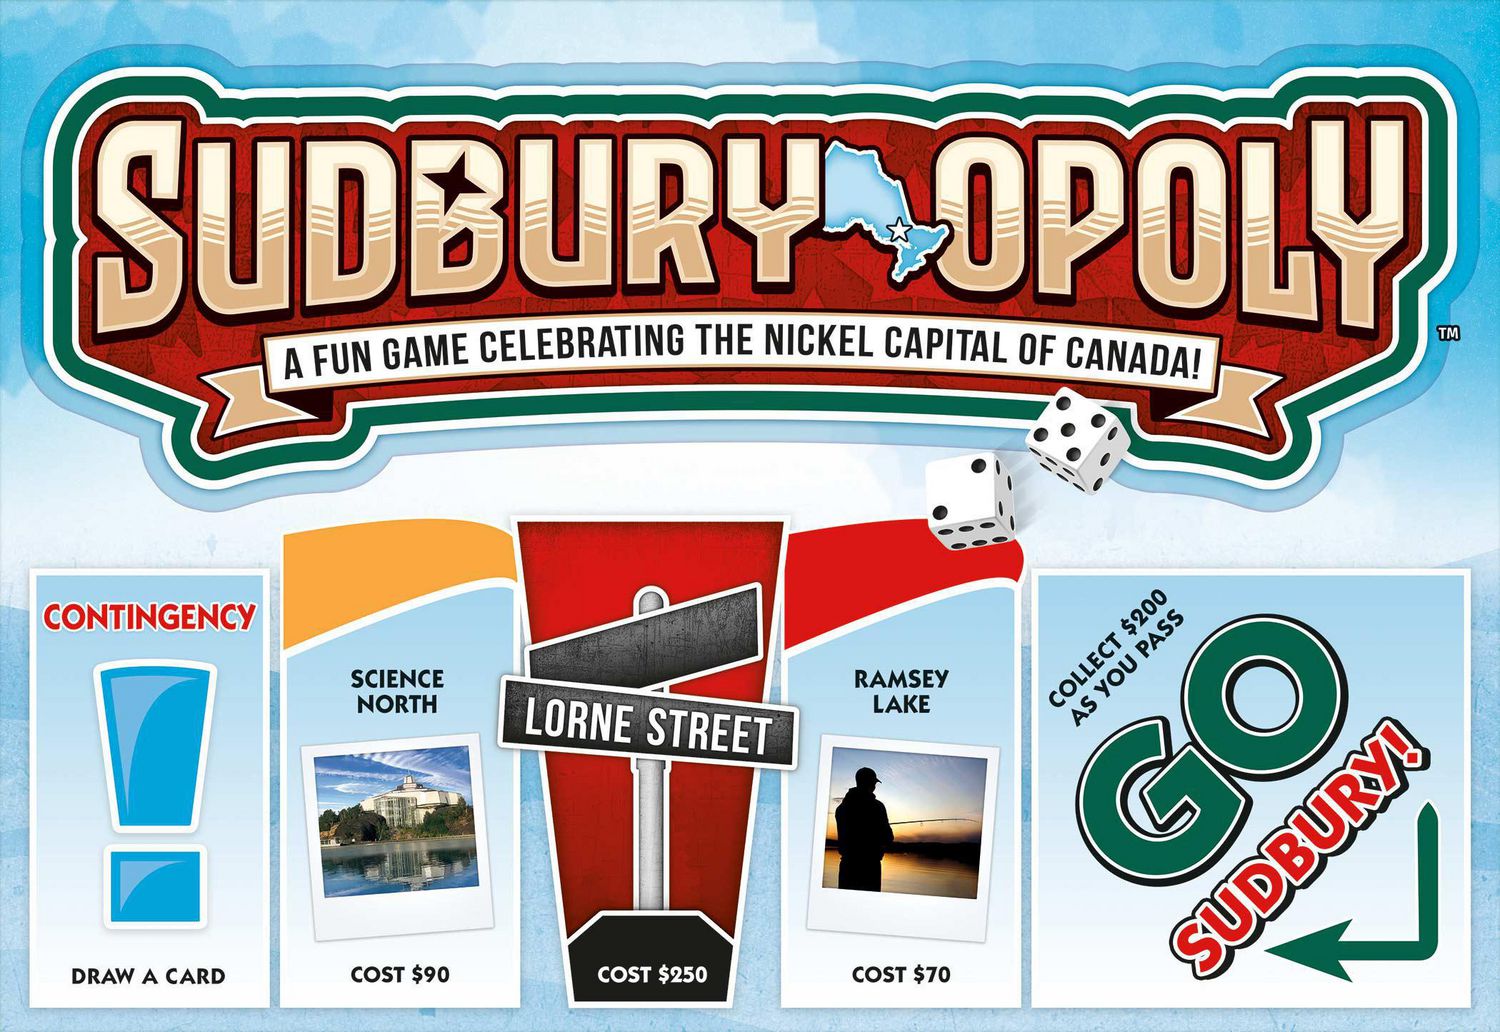 LATE FOR THE SKY - Sudbury-Opoly